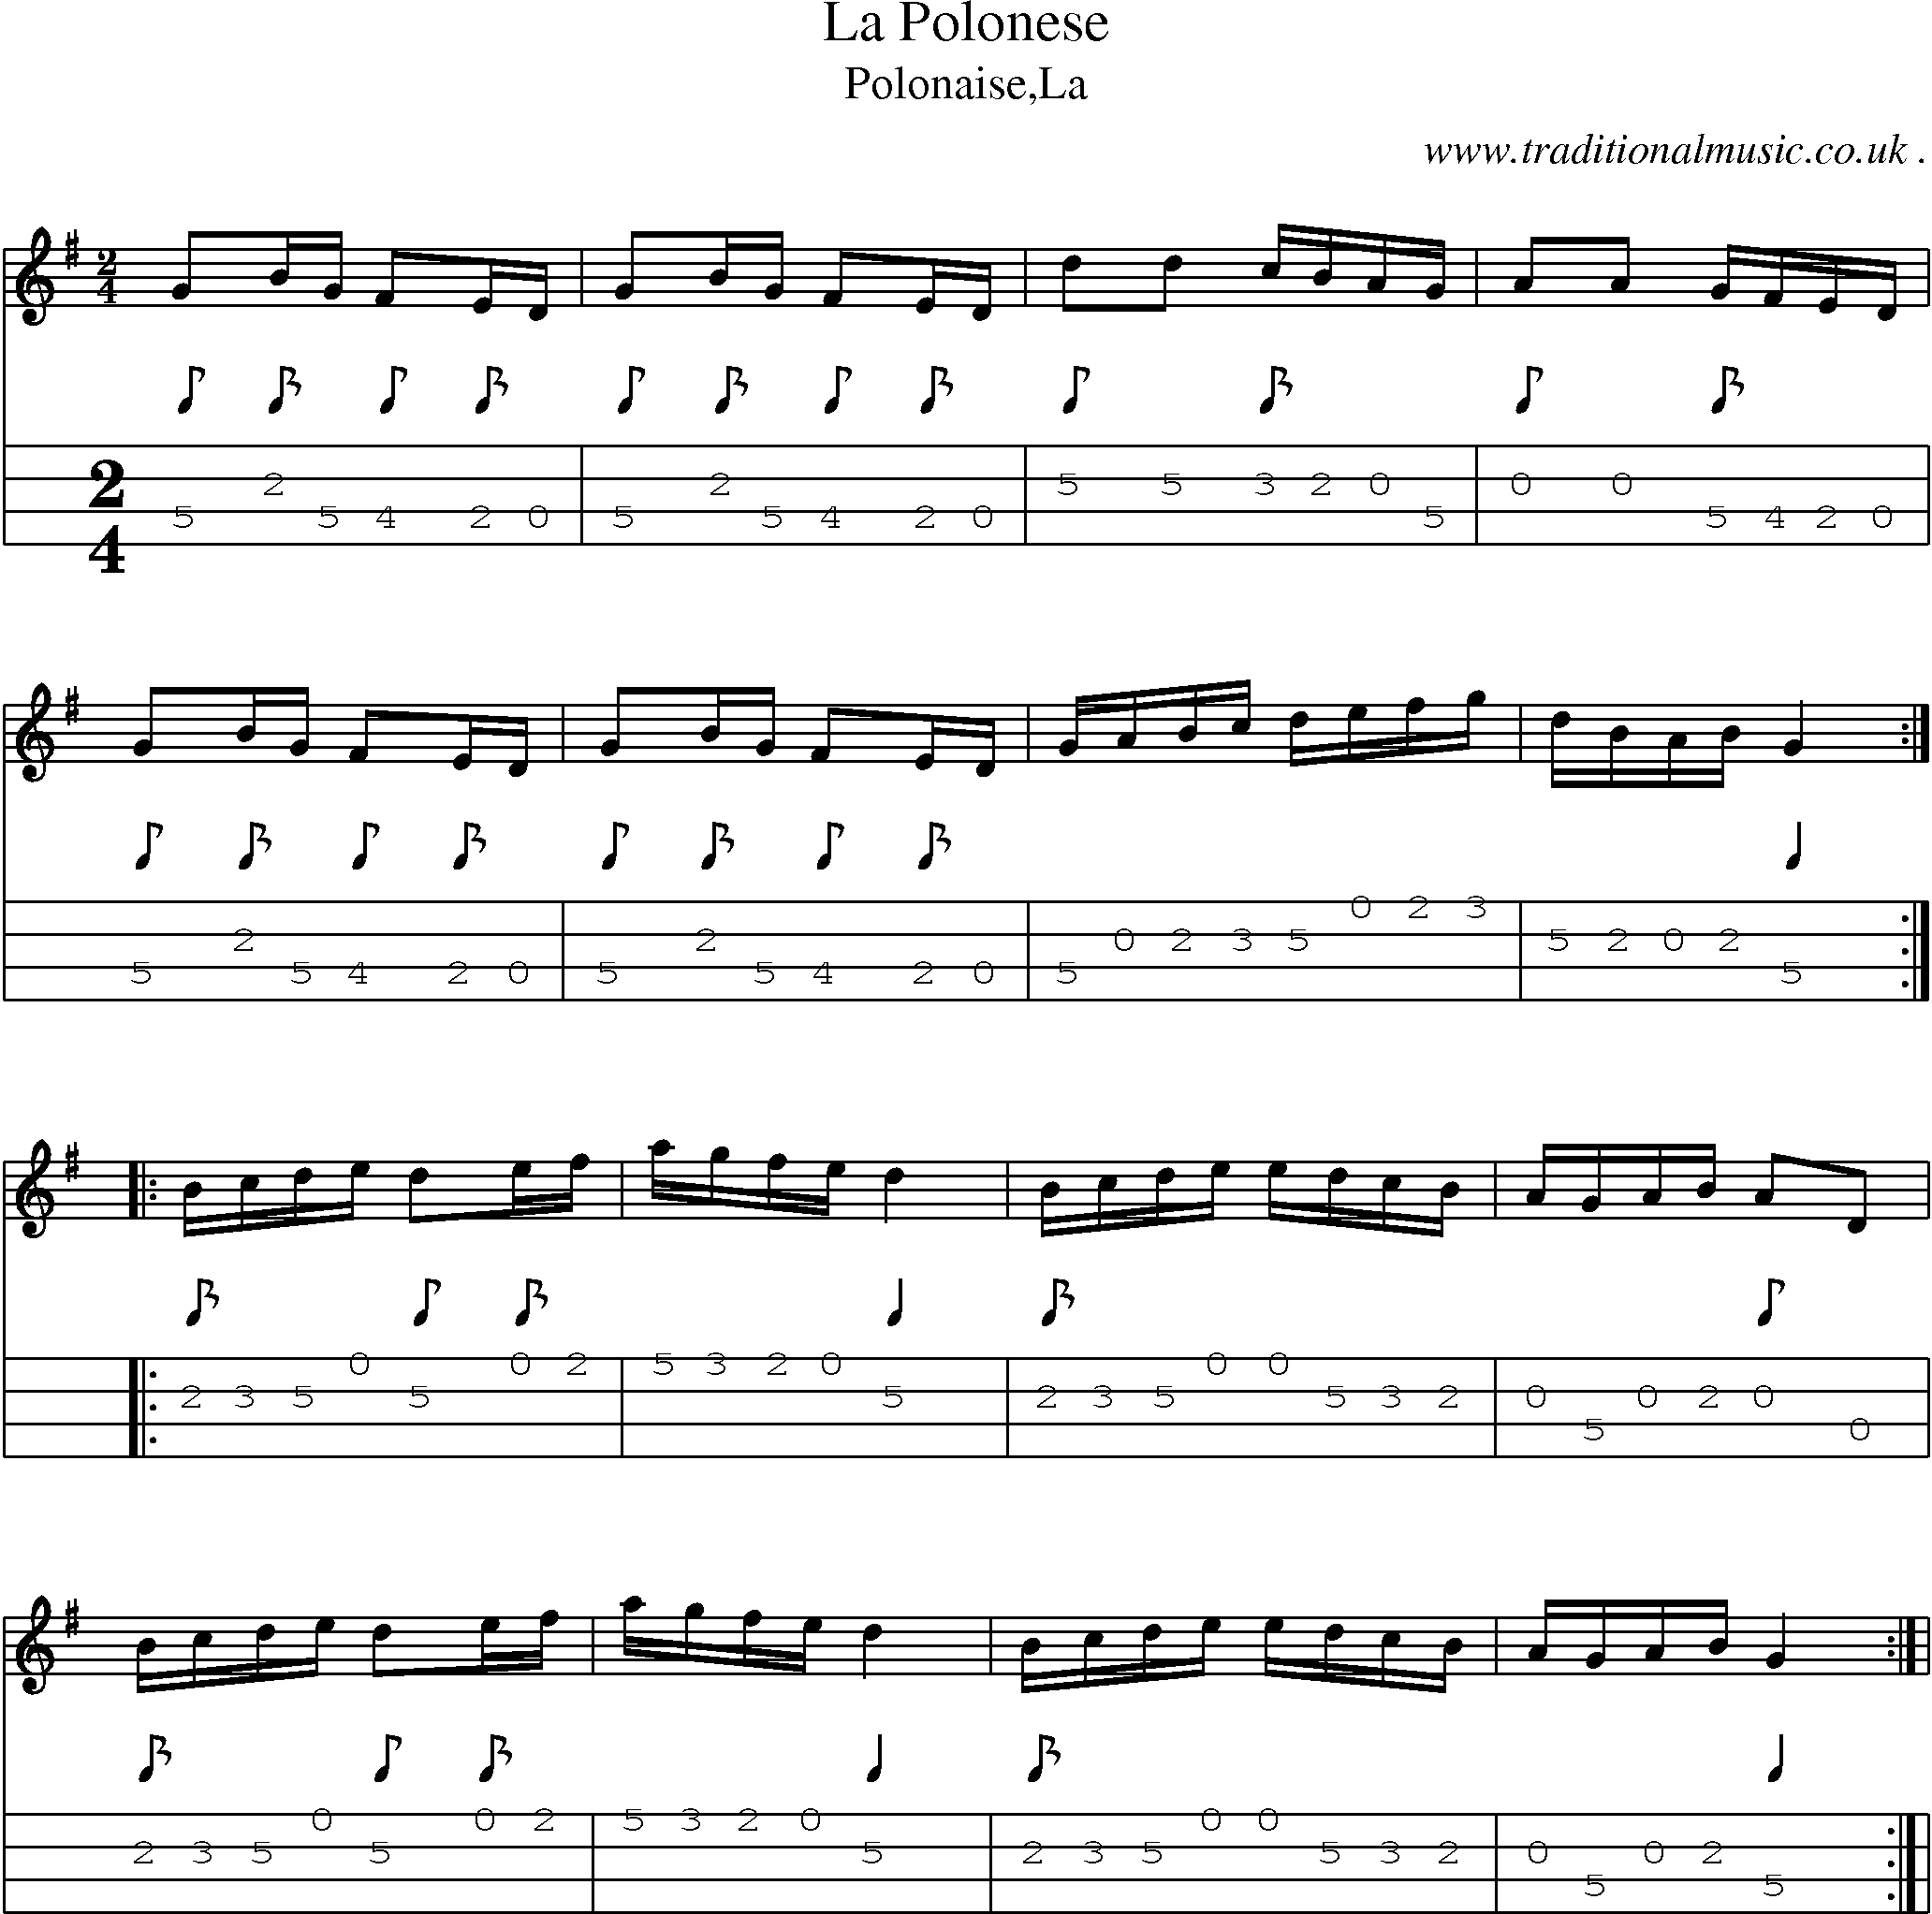 Sheet-Music and Mandolin Tabs for La Polonese